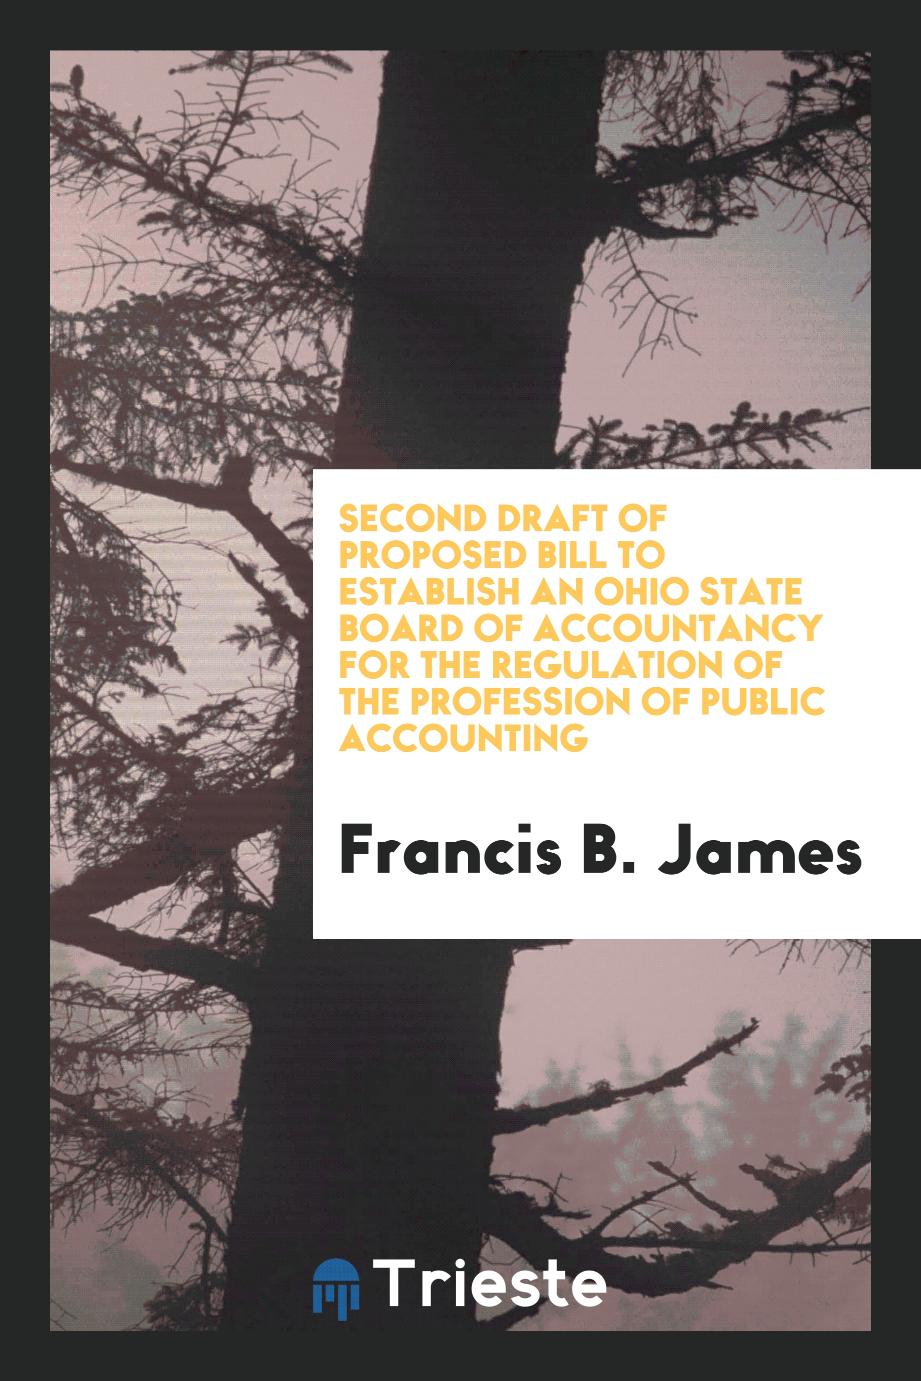 Second draft of Proposed bill to establish an Ohio State board of accountancy for the regulation of the profession of public accounting